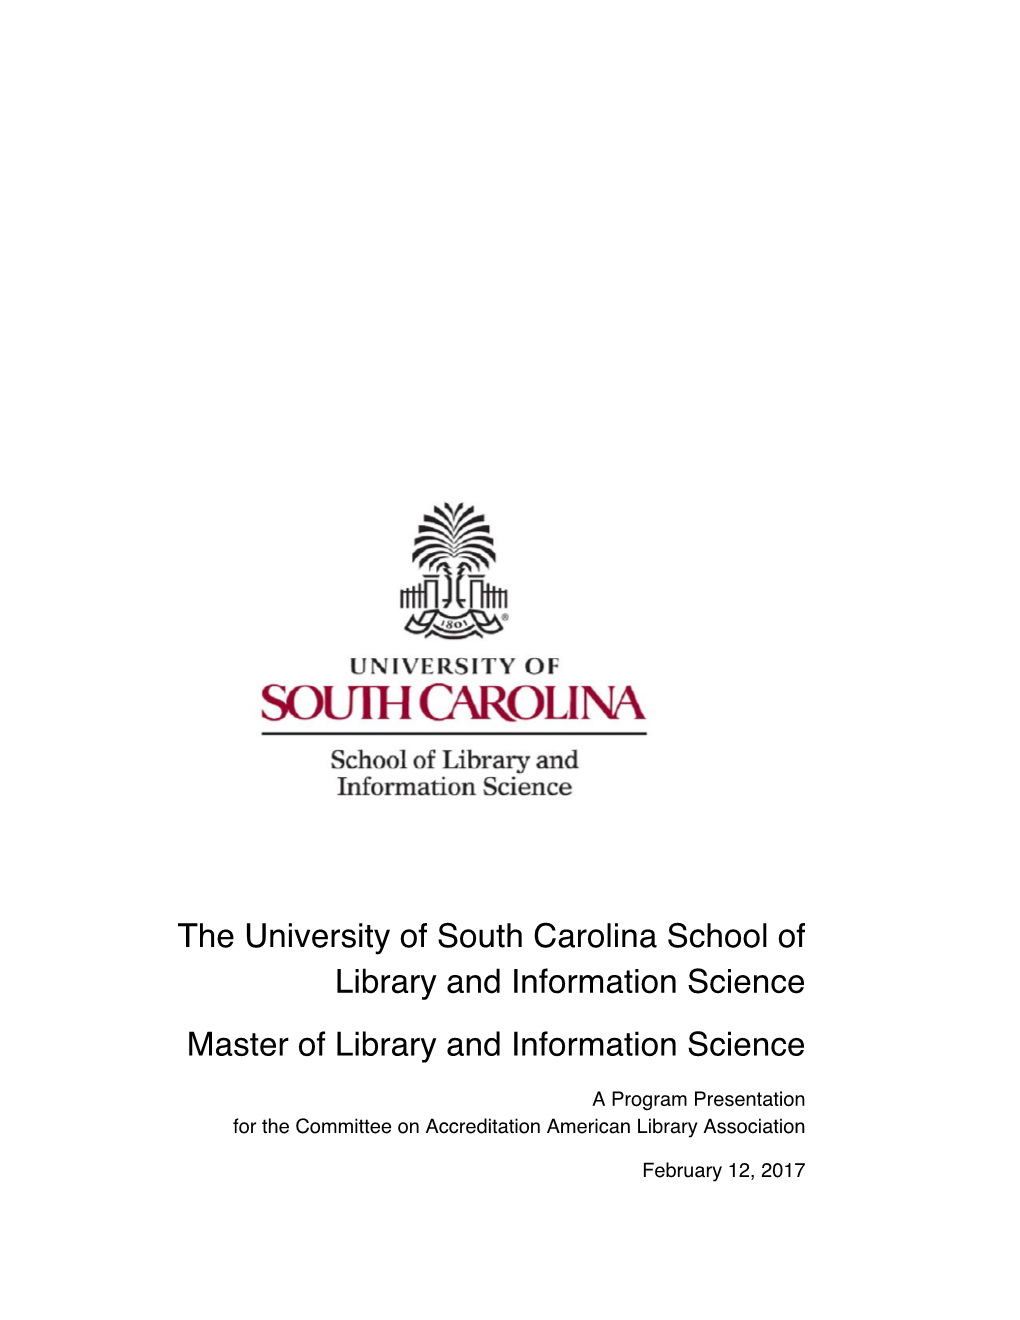 The University of South Carolina School of Library and Information Science Master of Library and Information Science